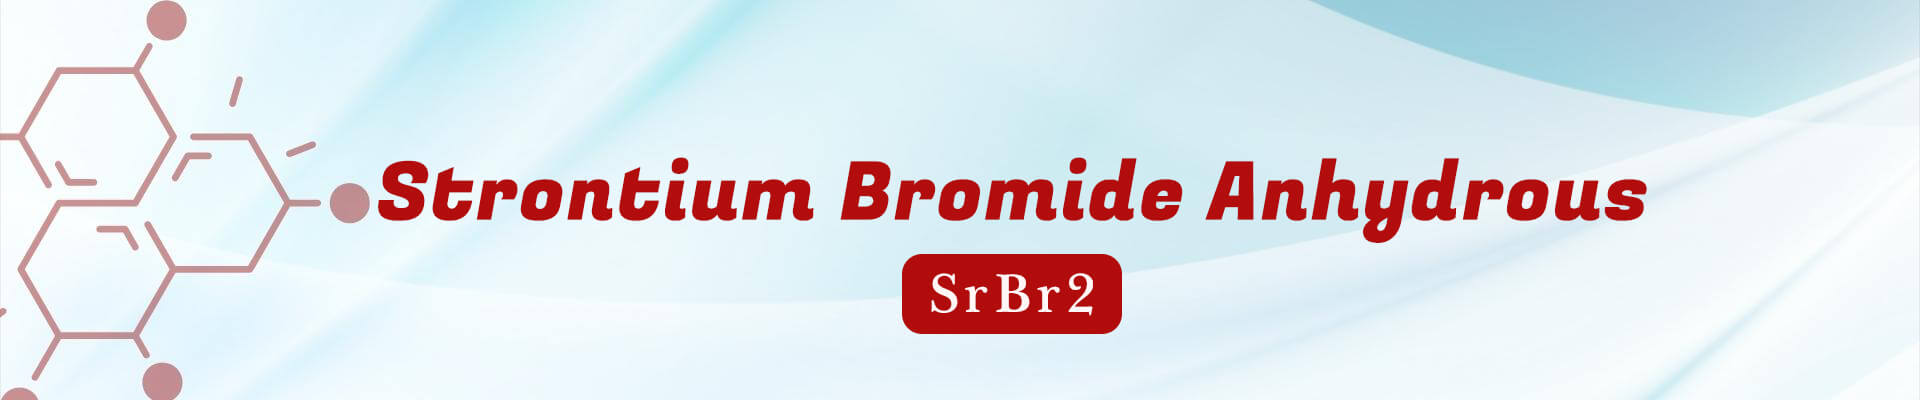 Strontium Bromide Anhydrous